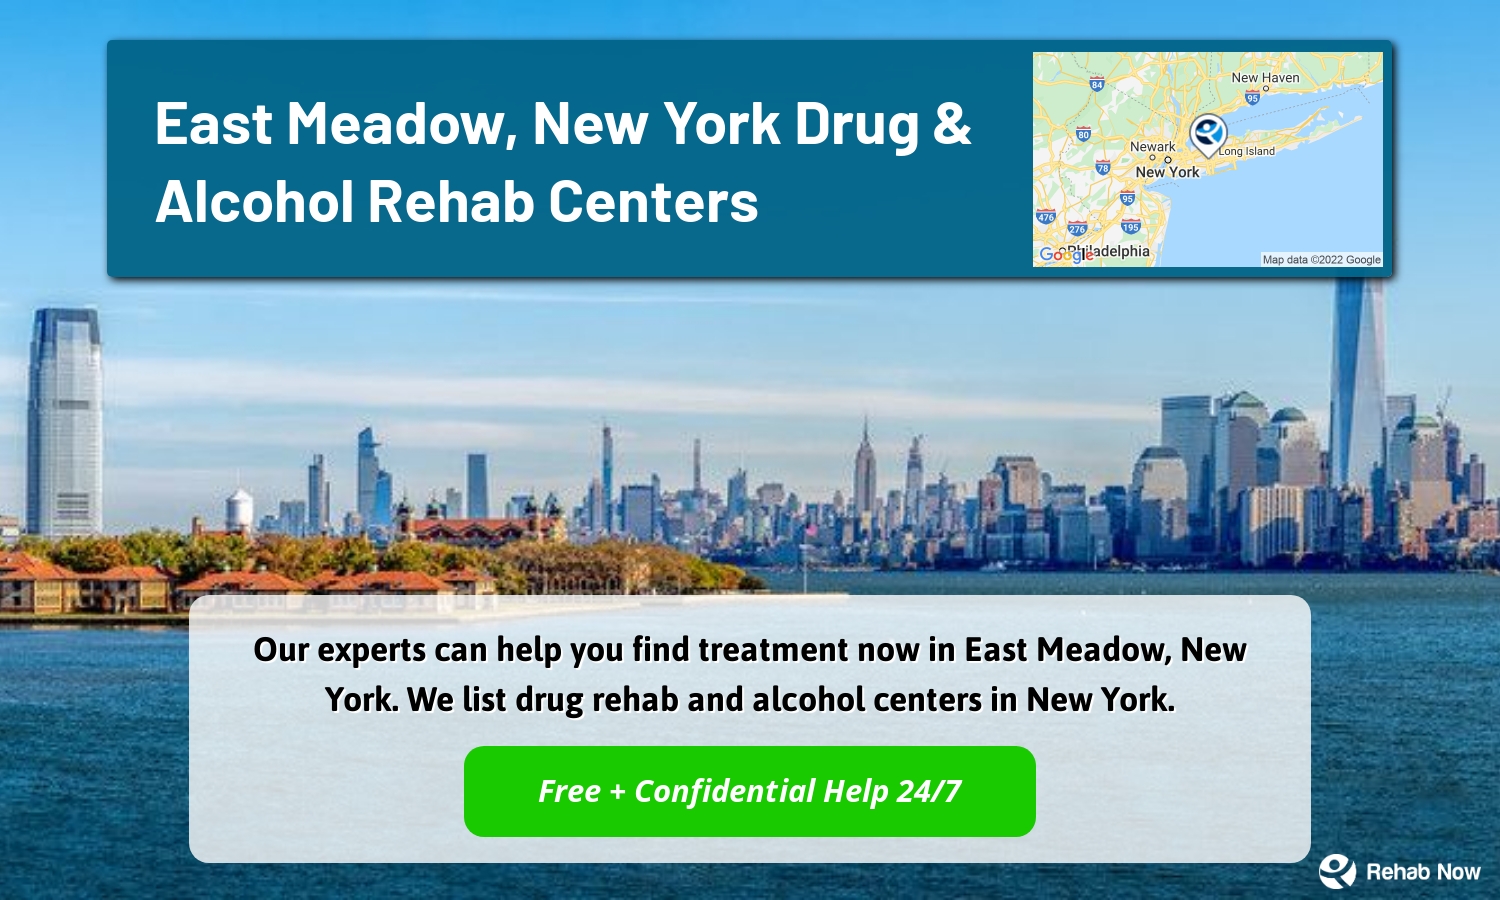 Our experts can help you find treatment now in East Meadow, New York. We list drug rehab and alcohol centers in New York.